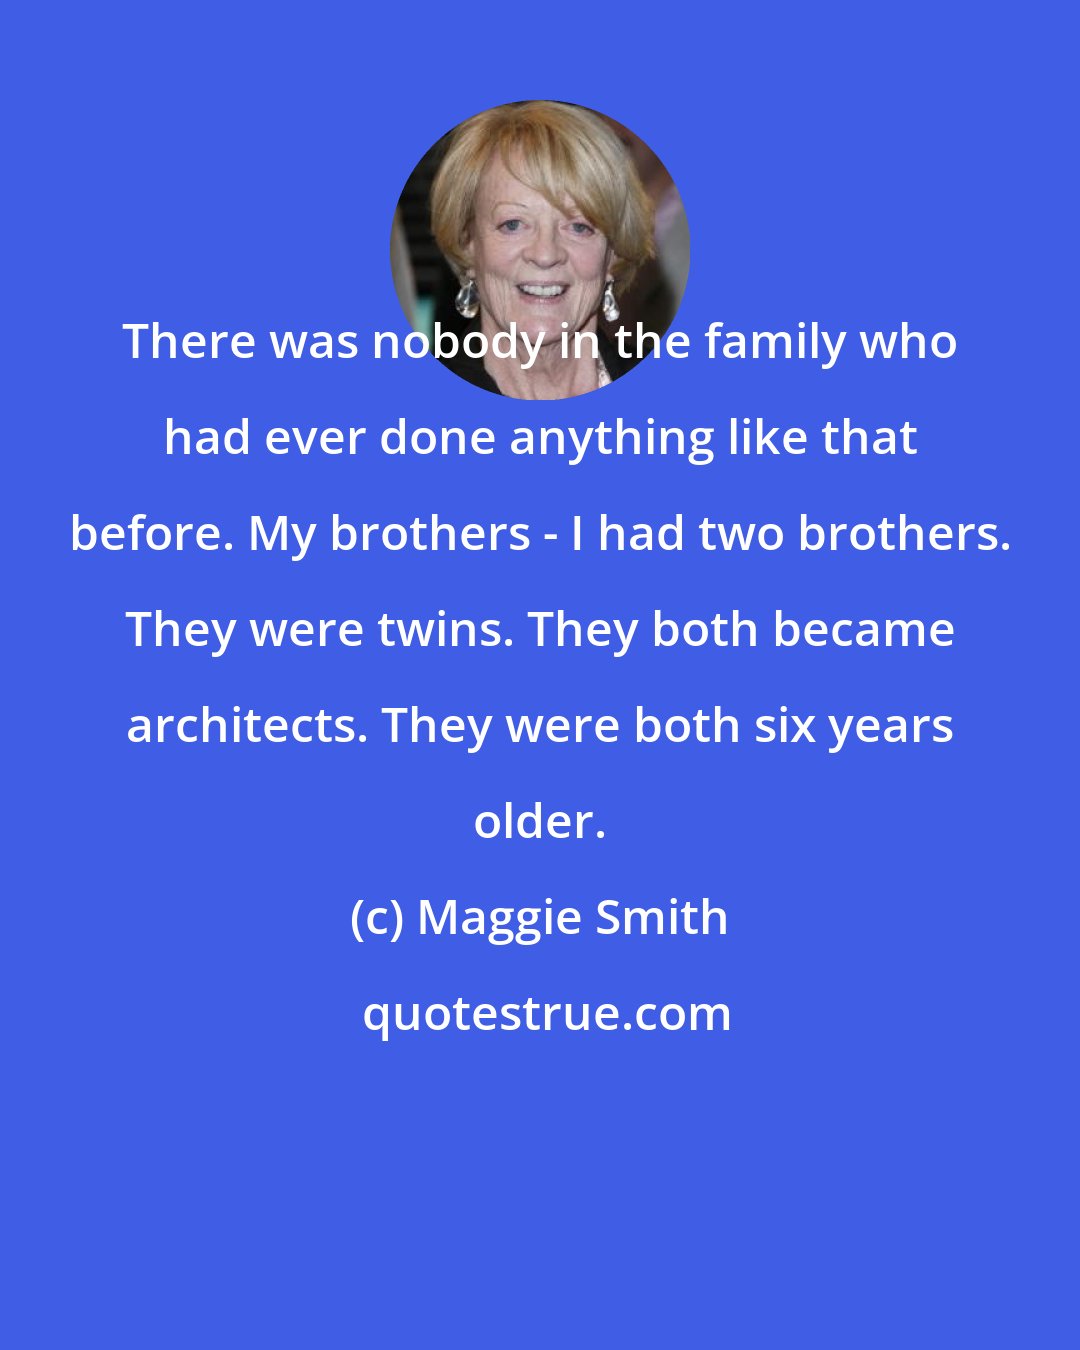 Maggie Smith: There was nobody in the family who had ever done anything like that before. My brothers - I had two brothers. They were twins. They both became architects. They were both six years older.